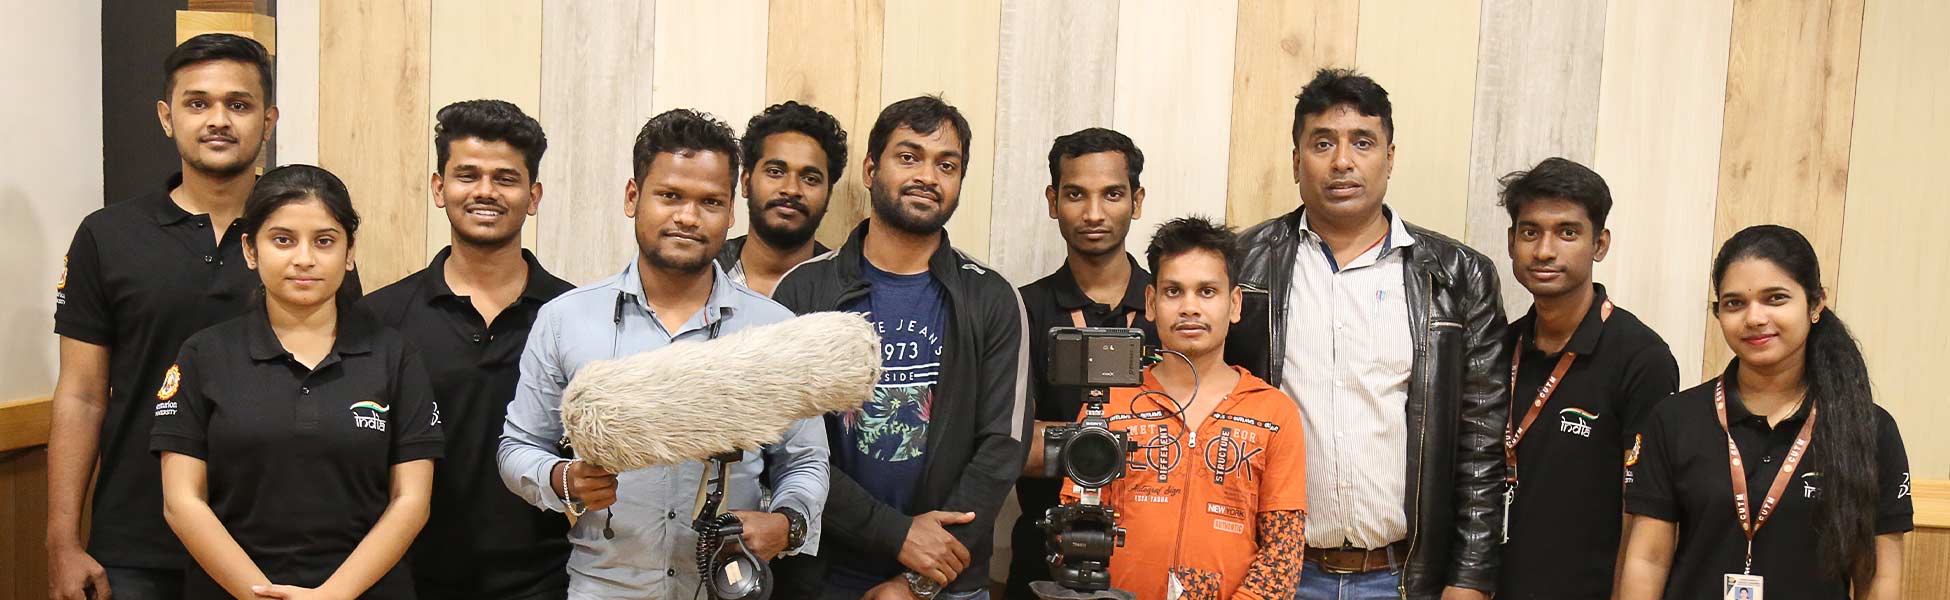 film production services in india, film production services in Tamil Nadu, video production services in india, video production services in Tamil Nadu, tv production services in india, tv production services in Tamil Nadu, production services in india, production services in Tamil Nadu